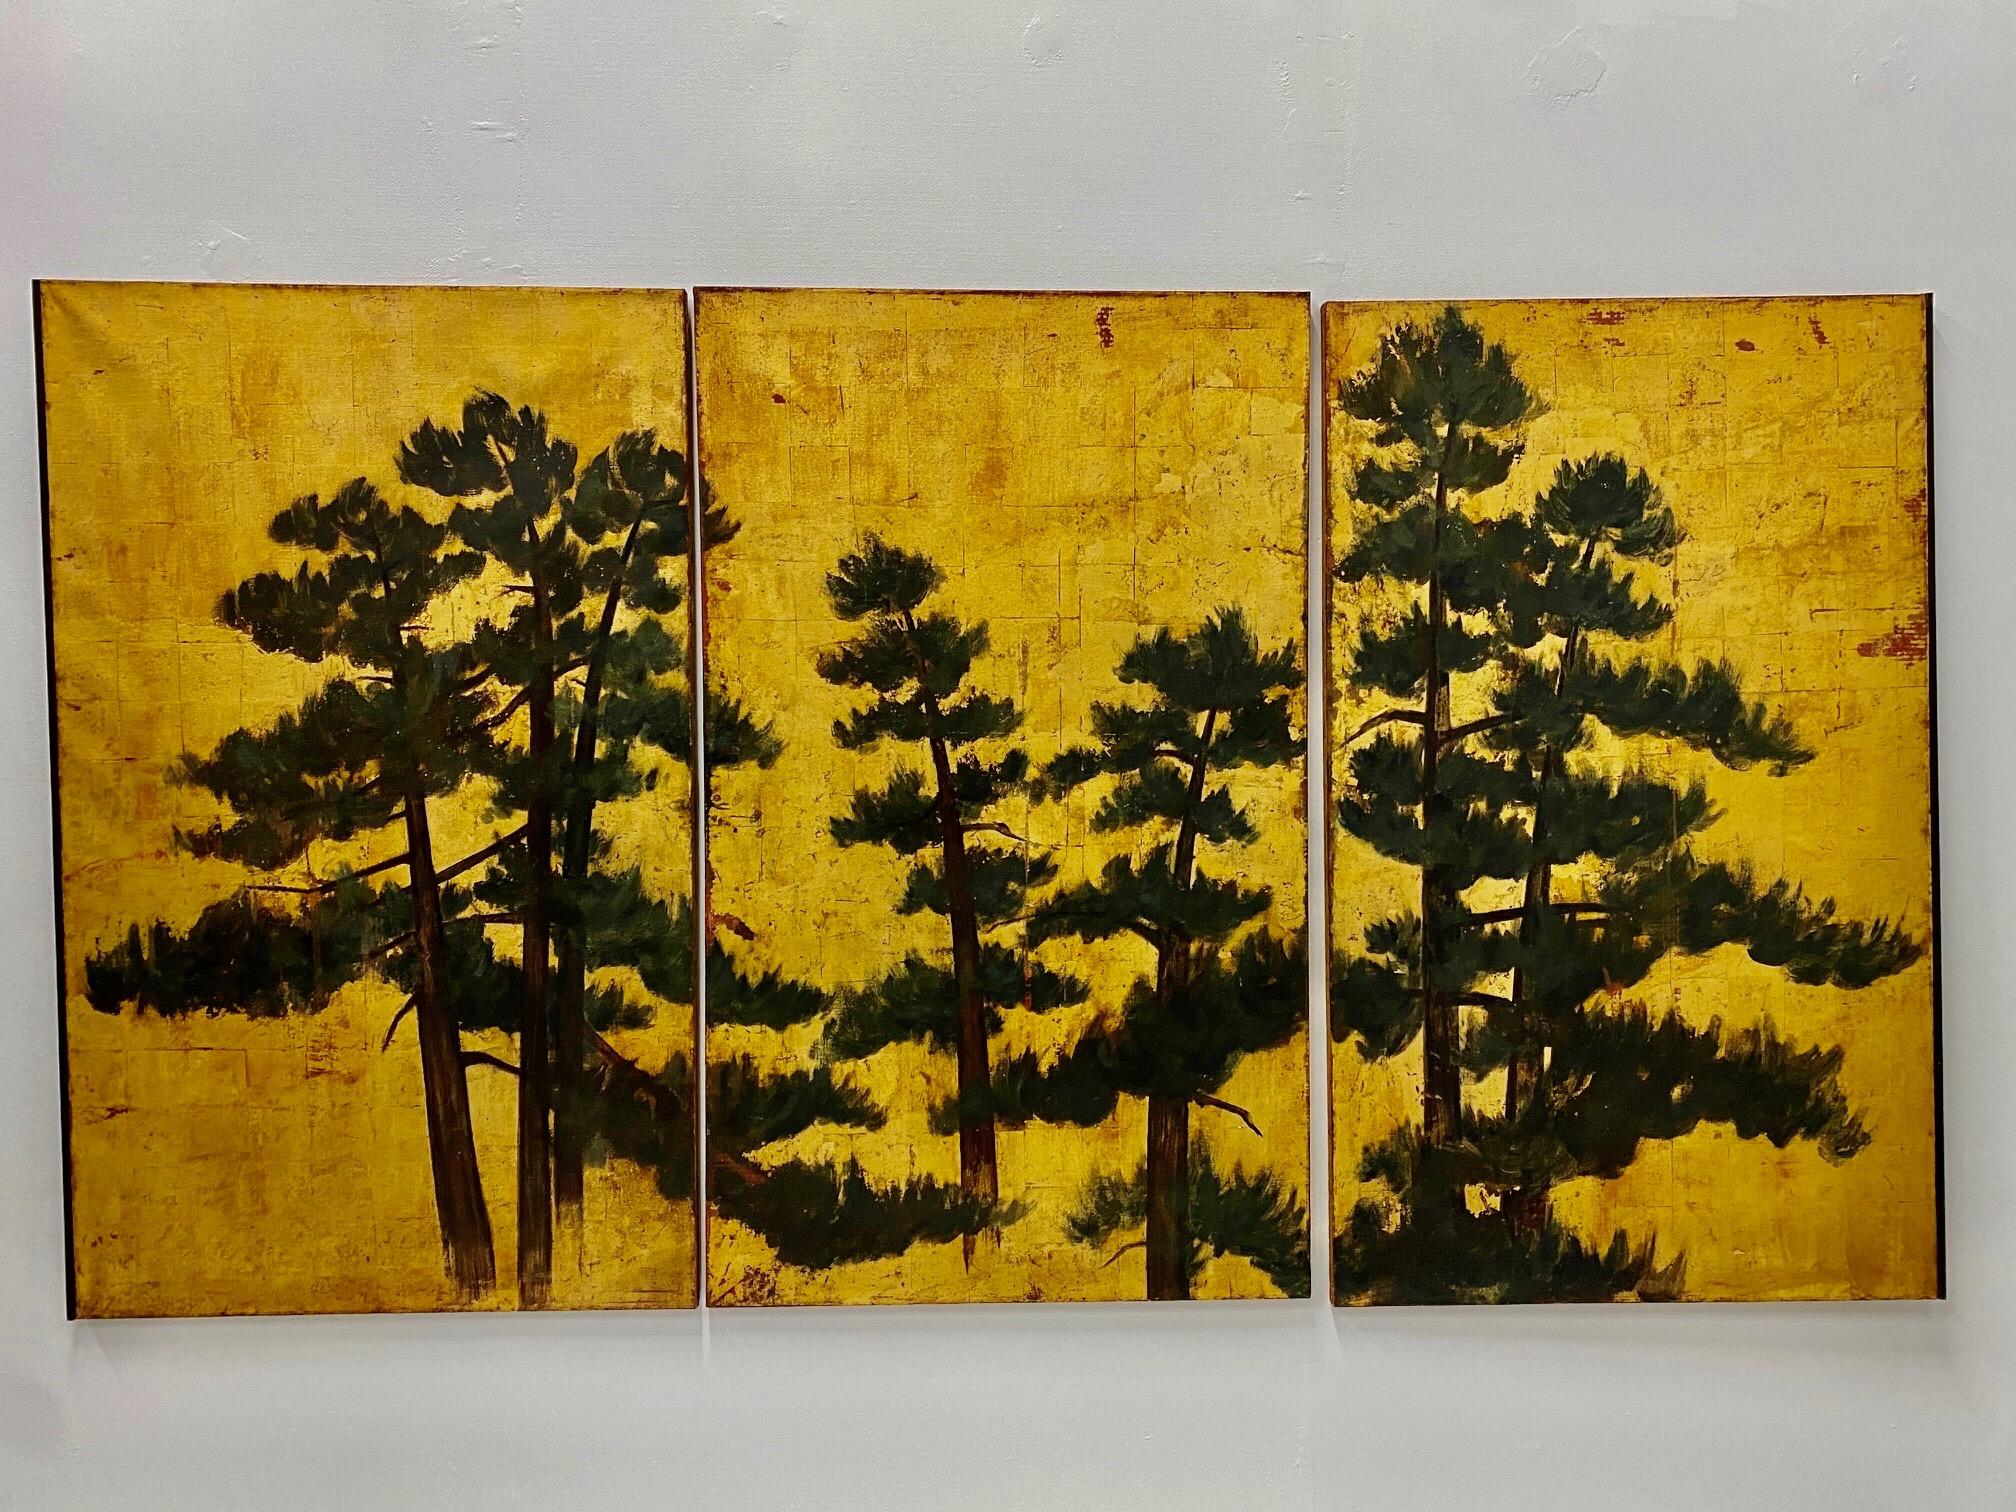 Italian Exceptional Large 19th Century Triptych of Pine Trees Against Gold Leaf Sky